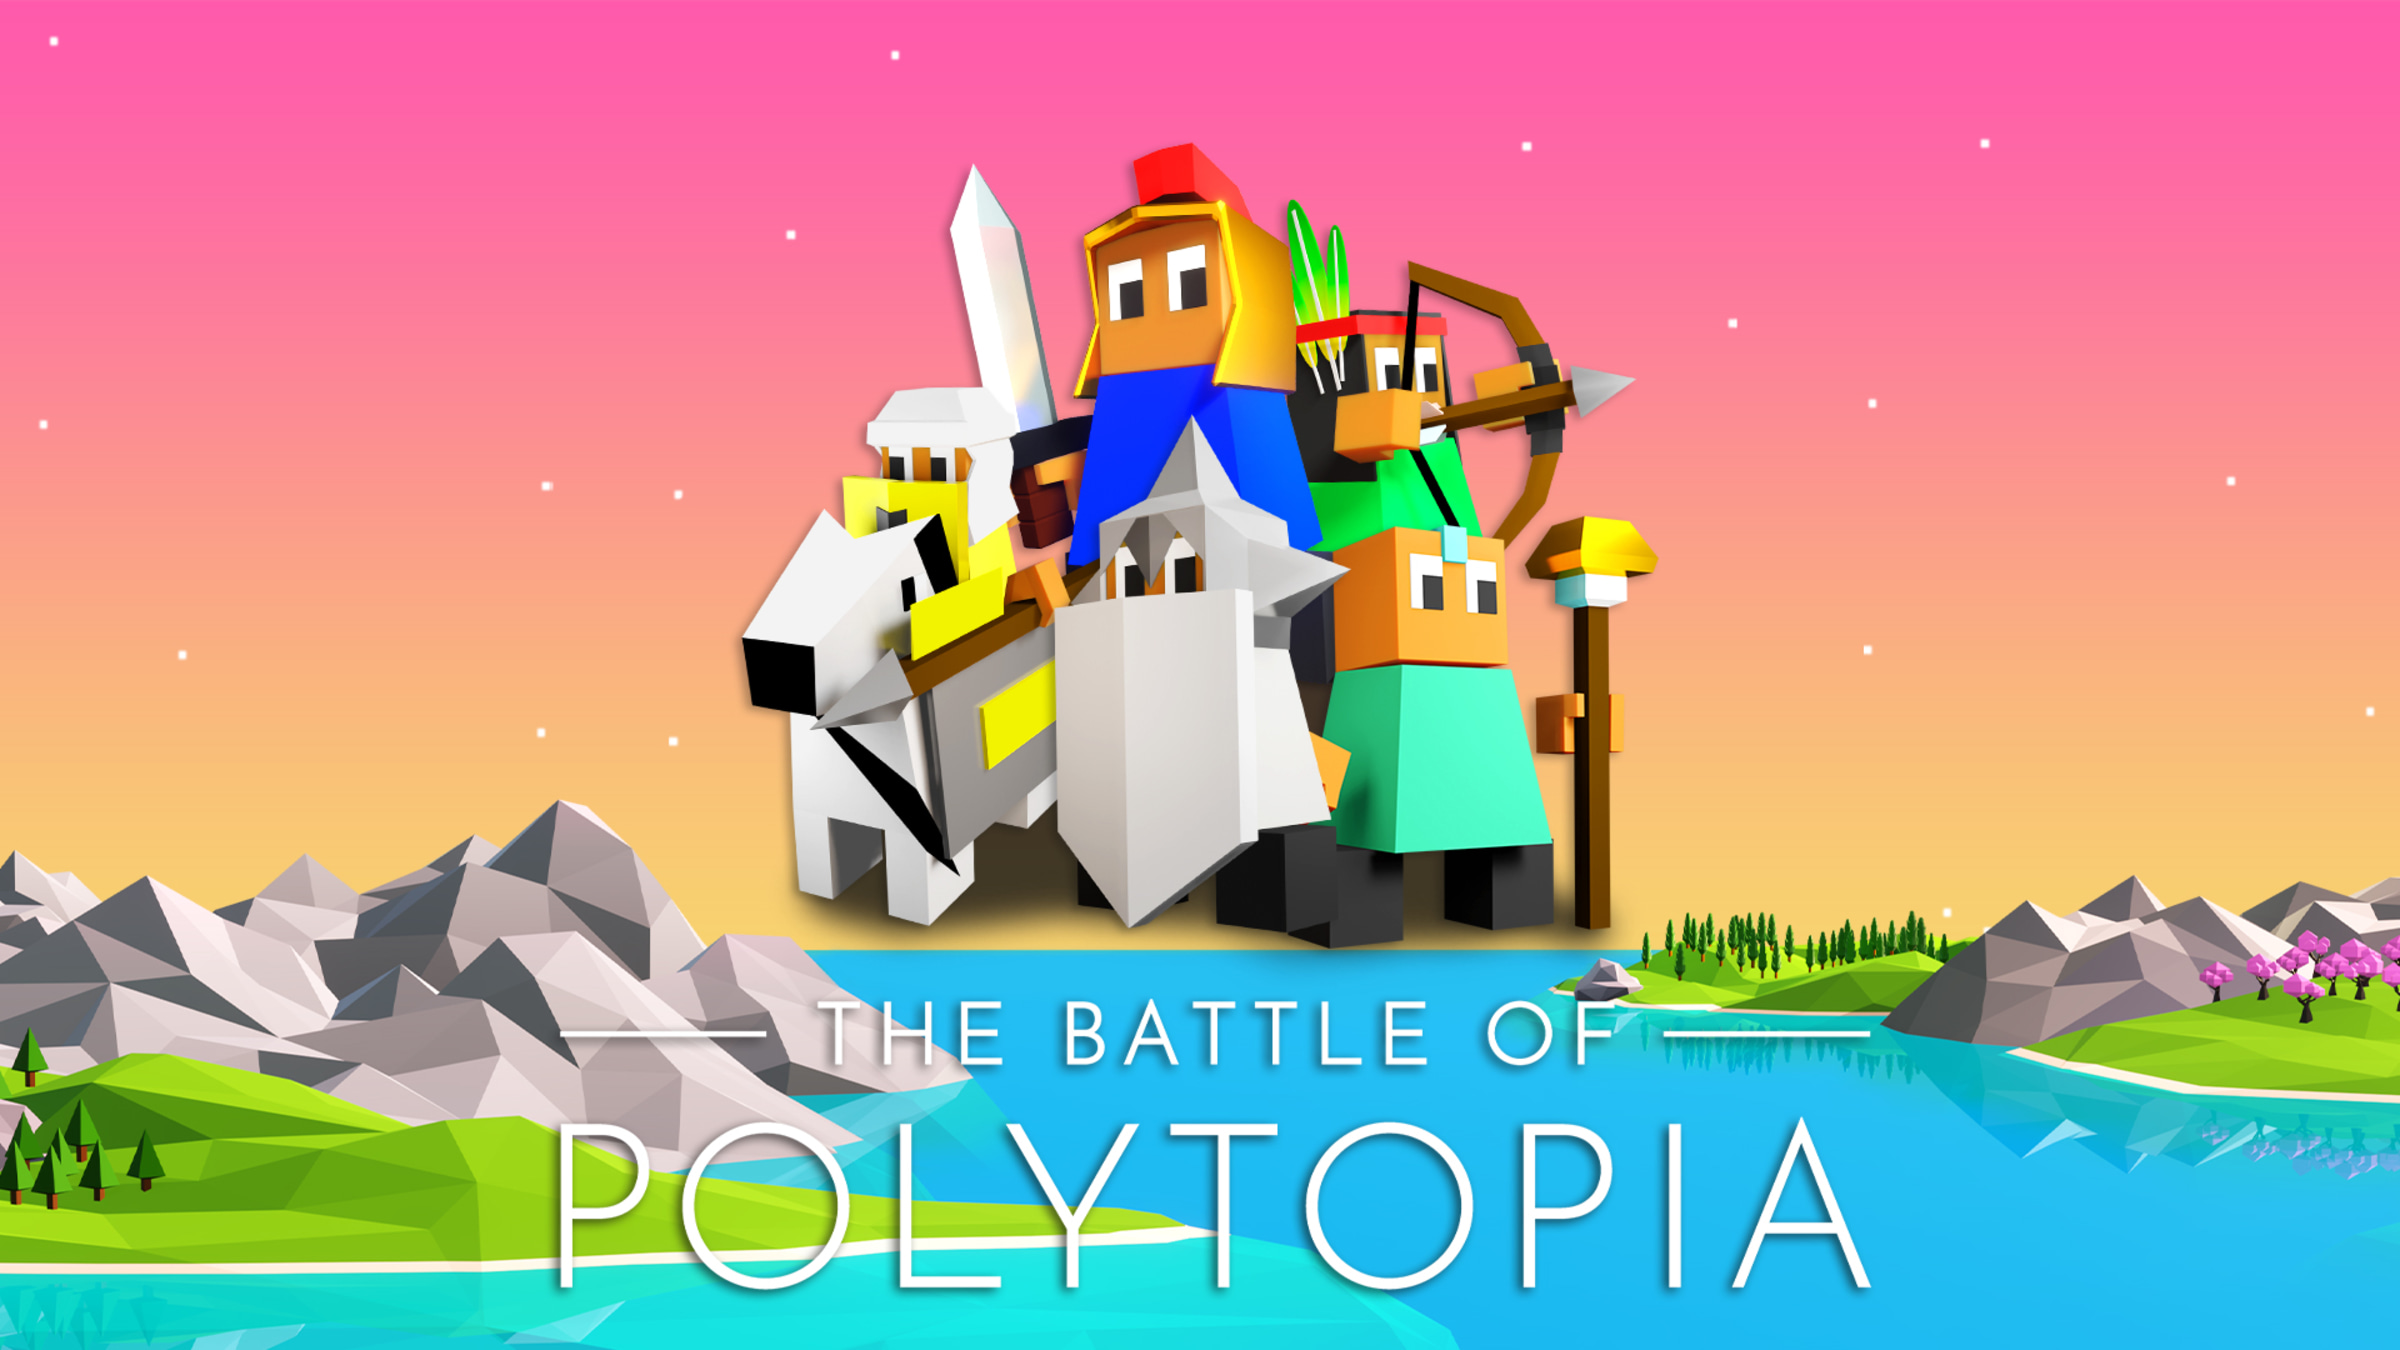 The Battle Of Polytopia For Nintendo Switch - Nintendo Official Site